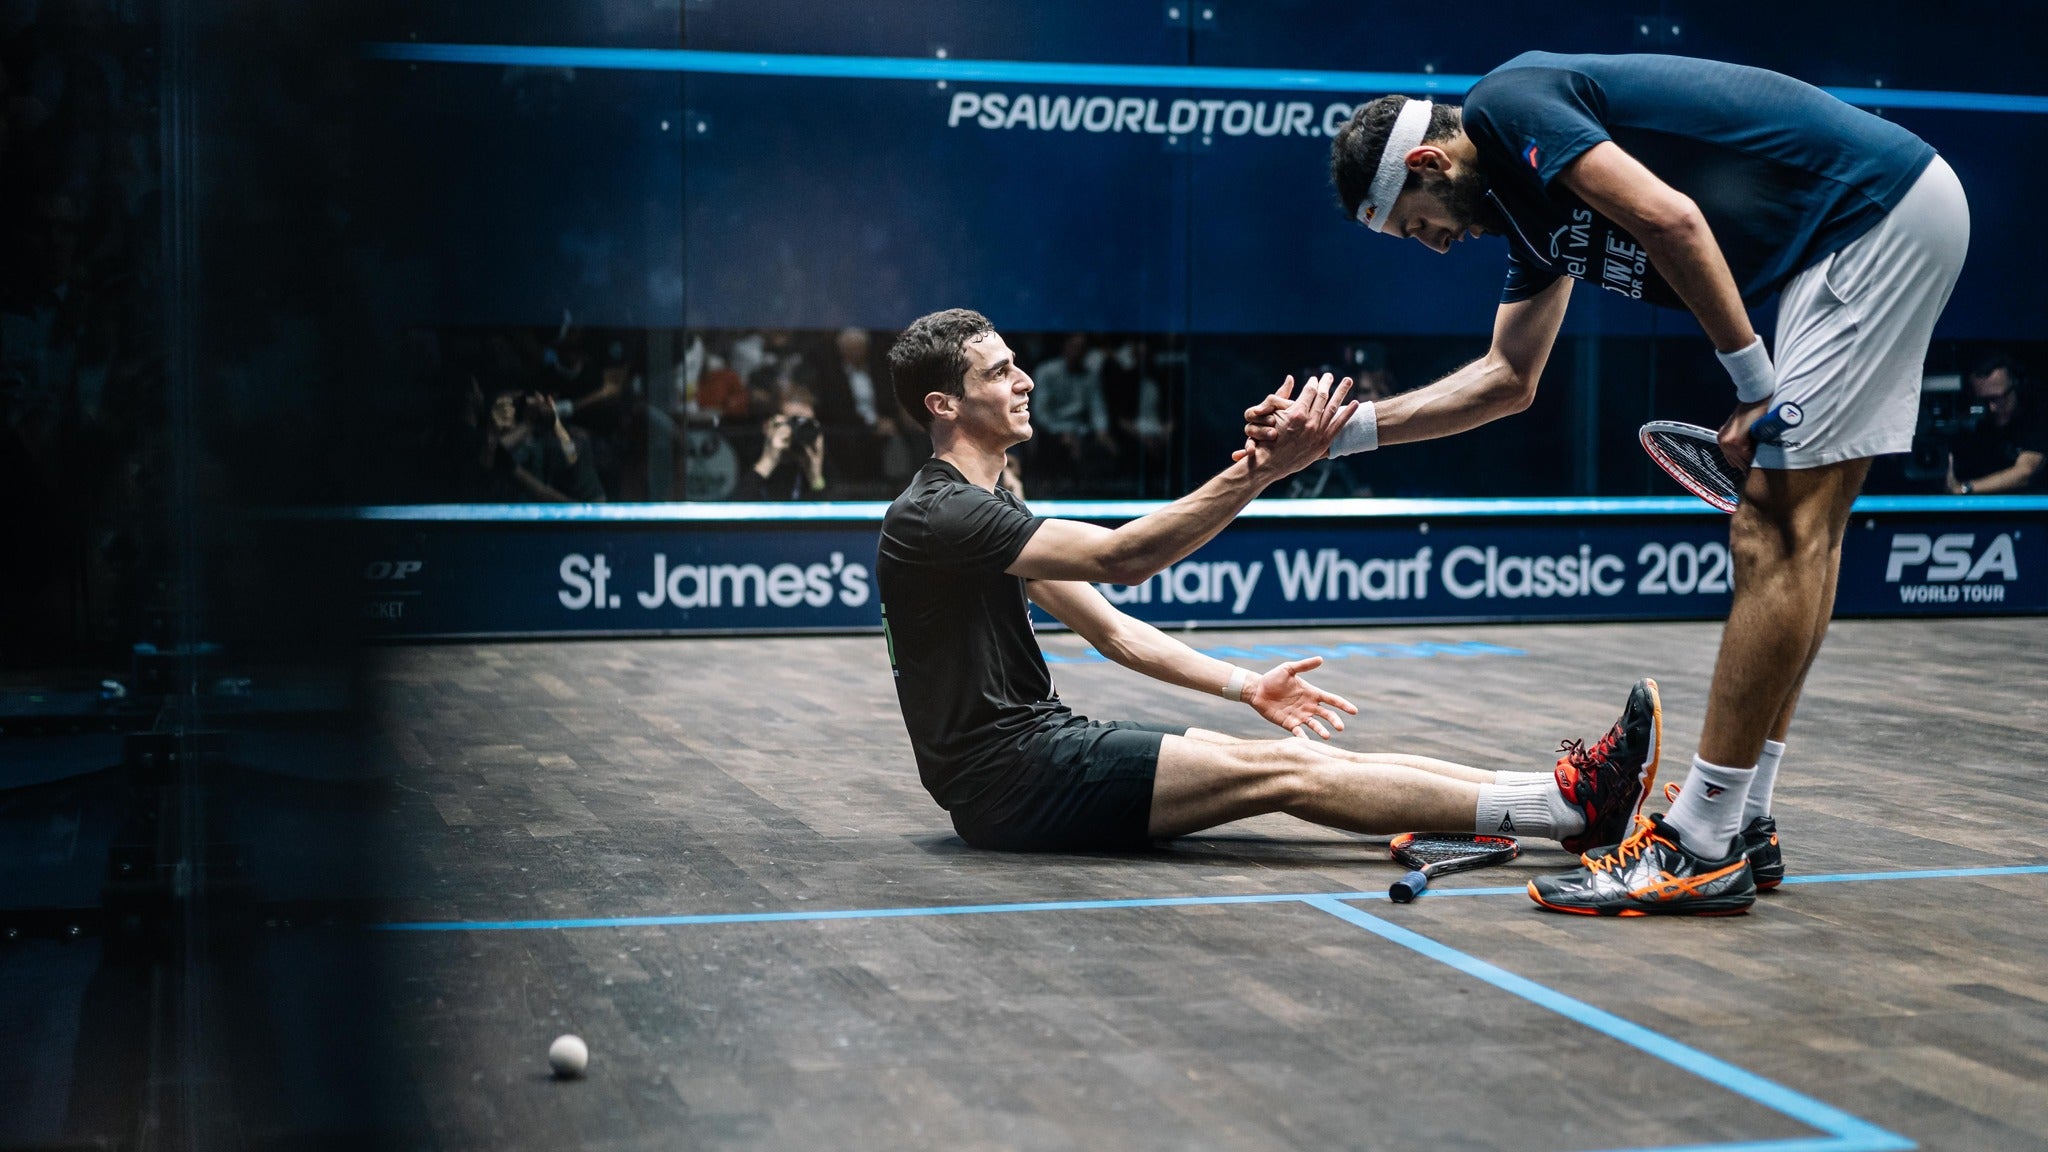 GillenMarkets Canary Wharf Squash Classic 2022 Event Title Pic